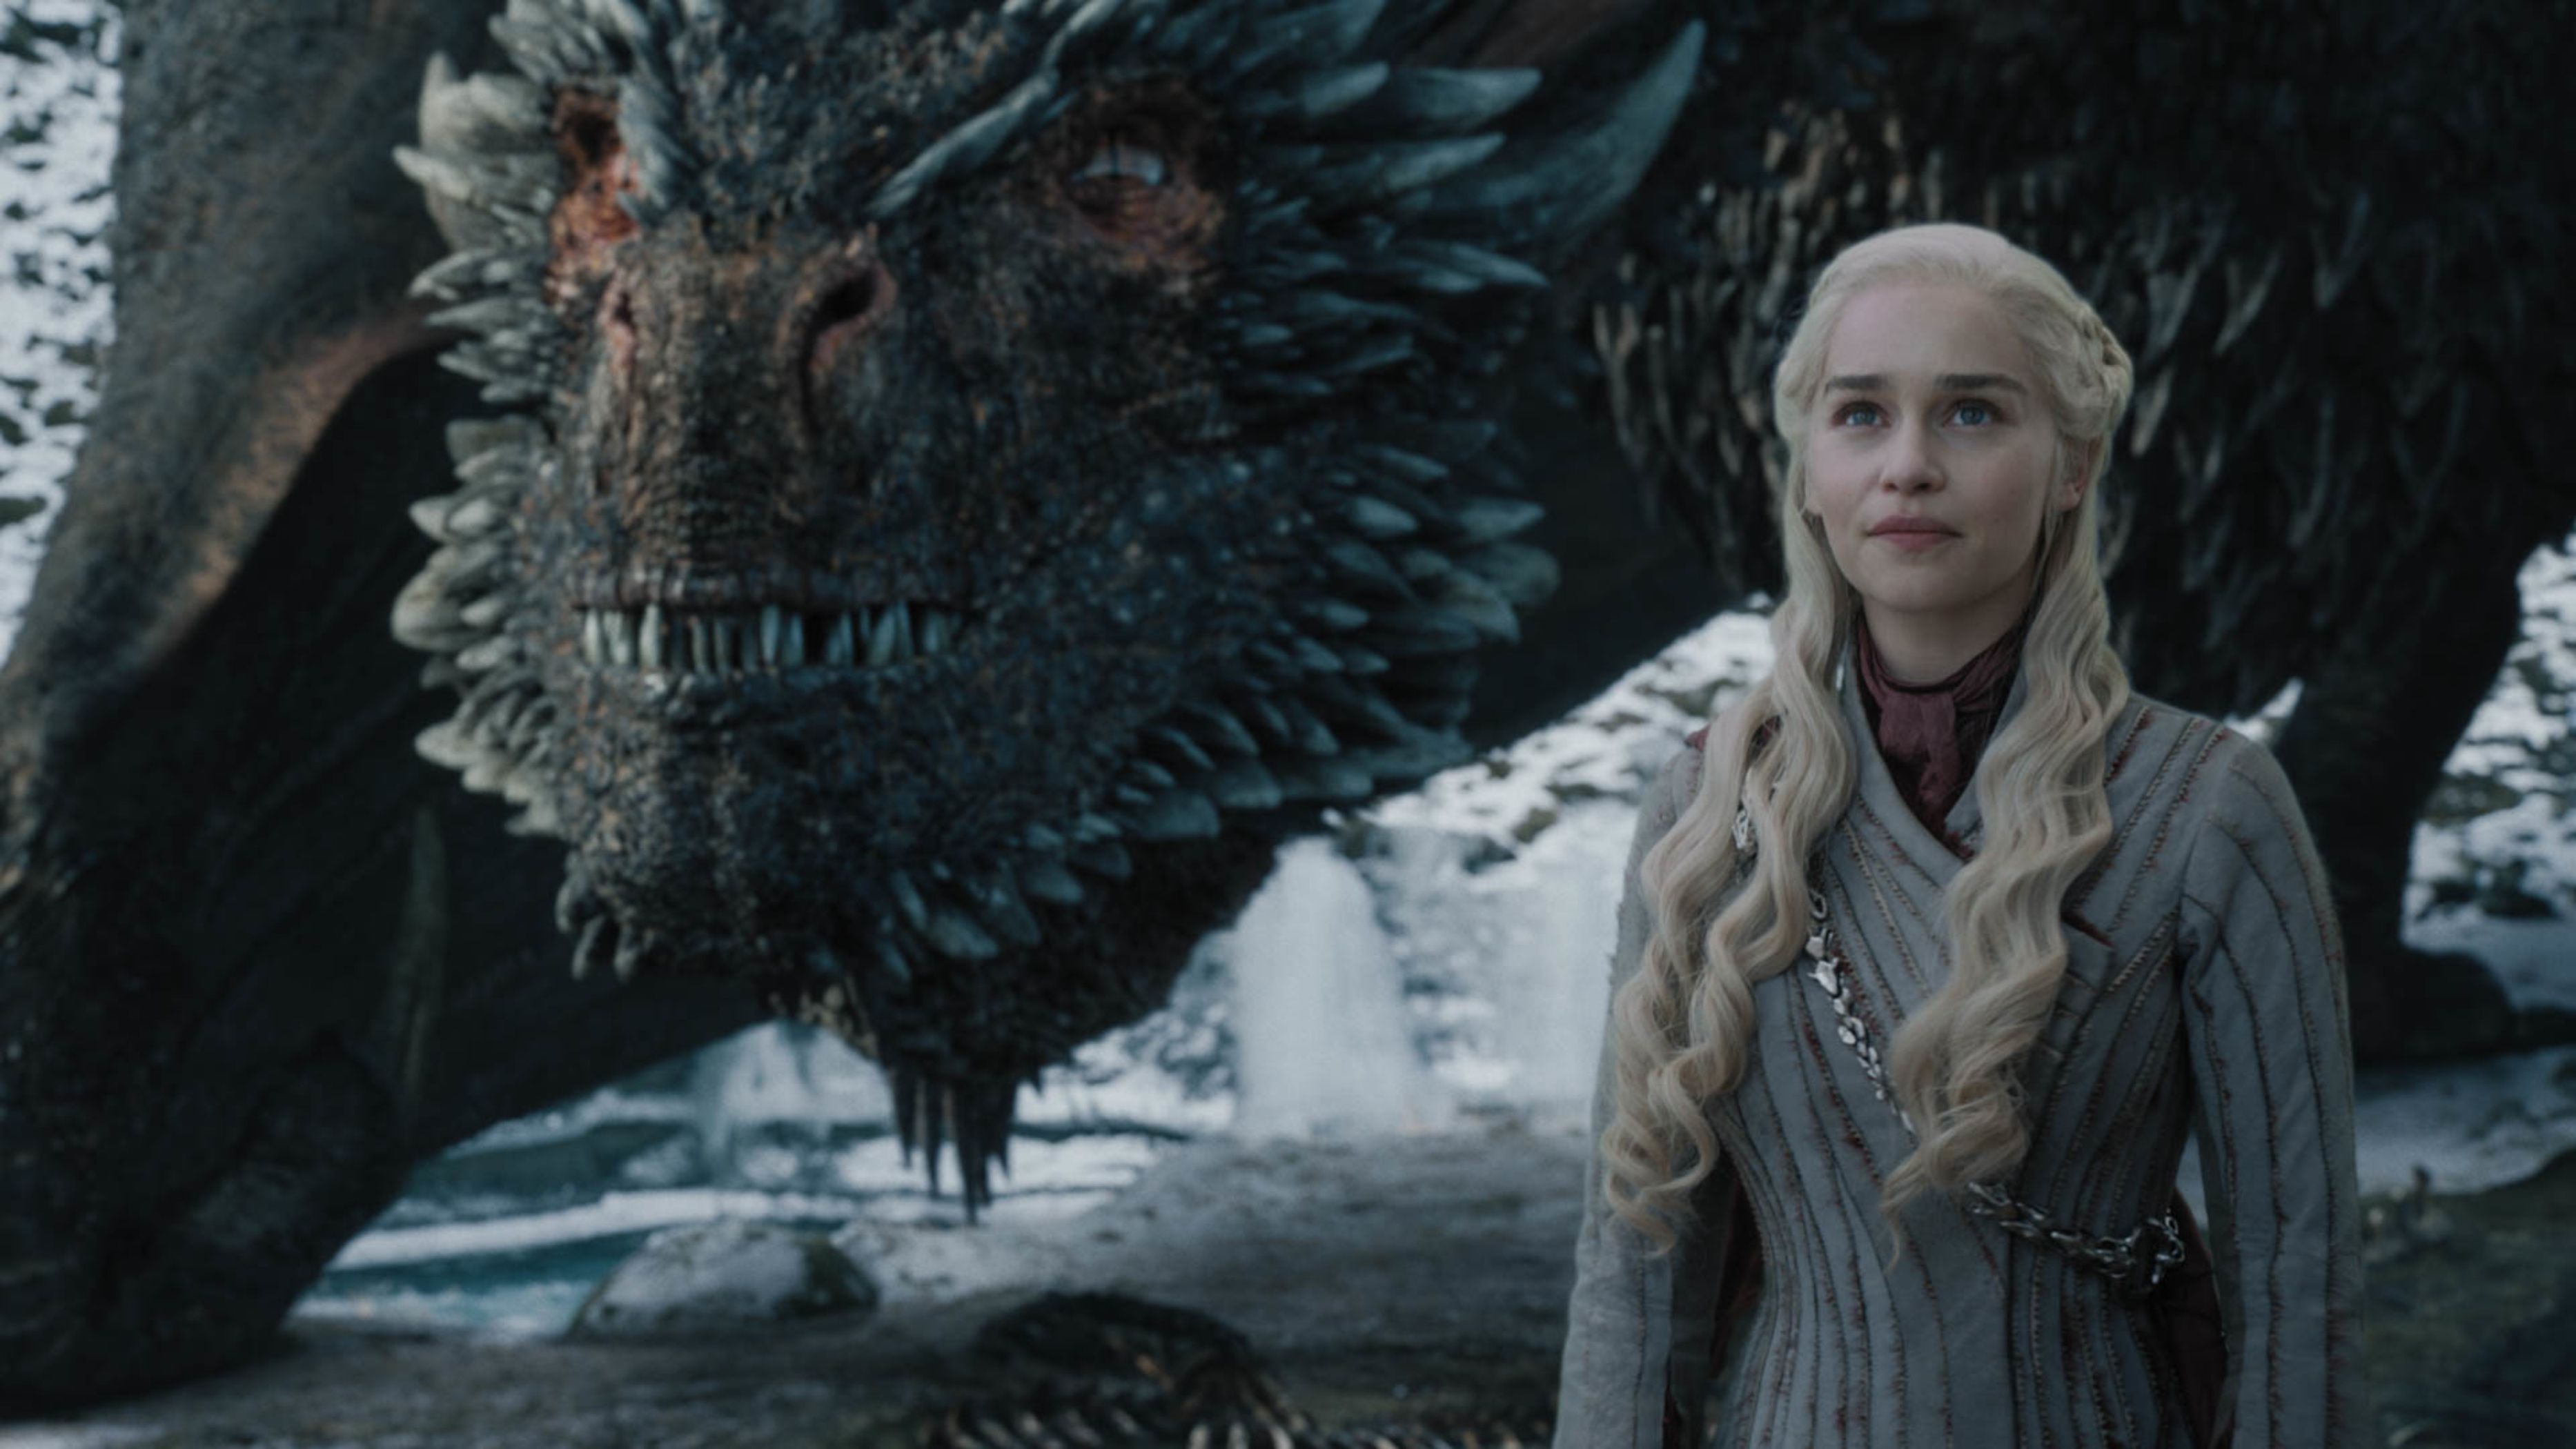 Which Character from a Hit HBO Series Are You Most Like? game of thrones daenerys targaryen3 1558306532